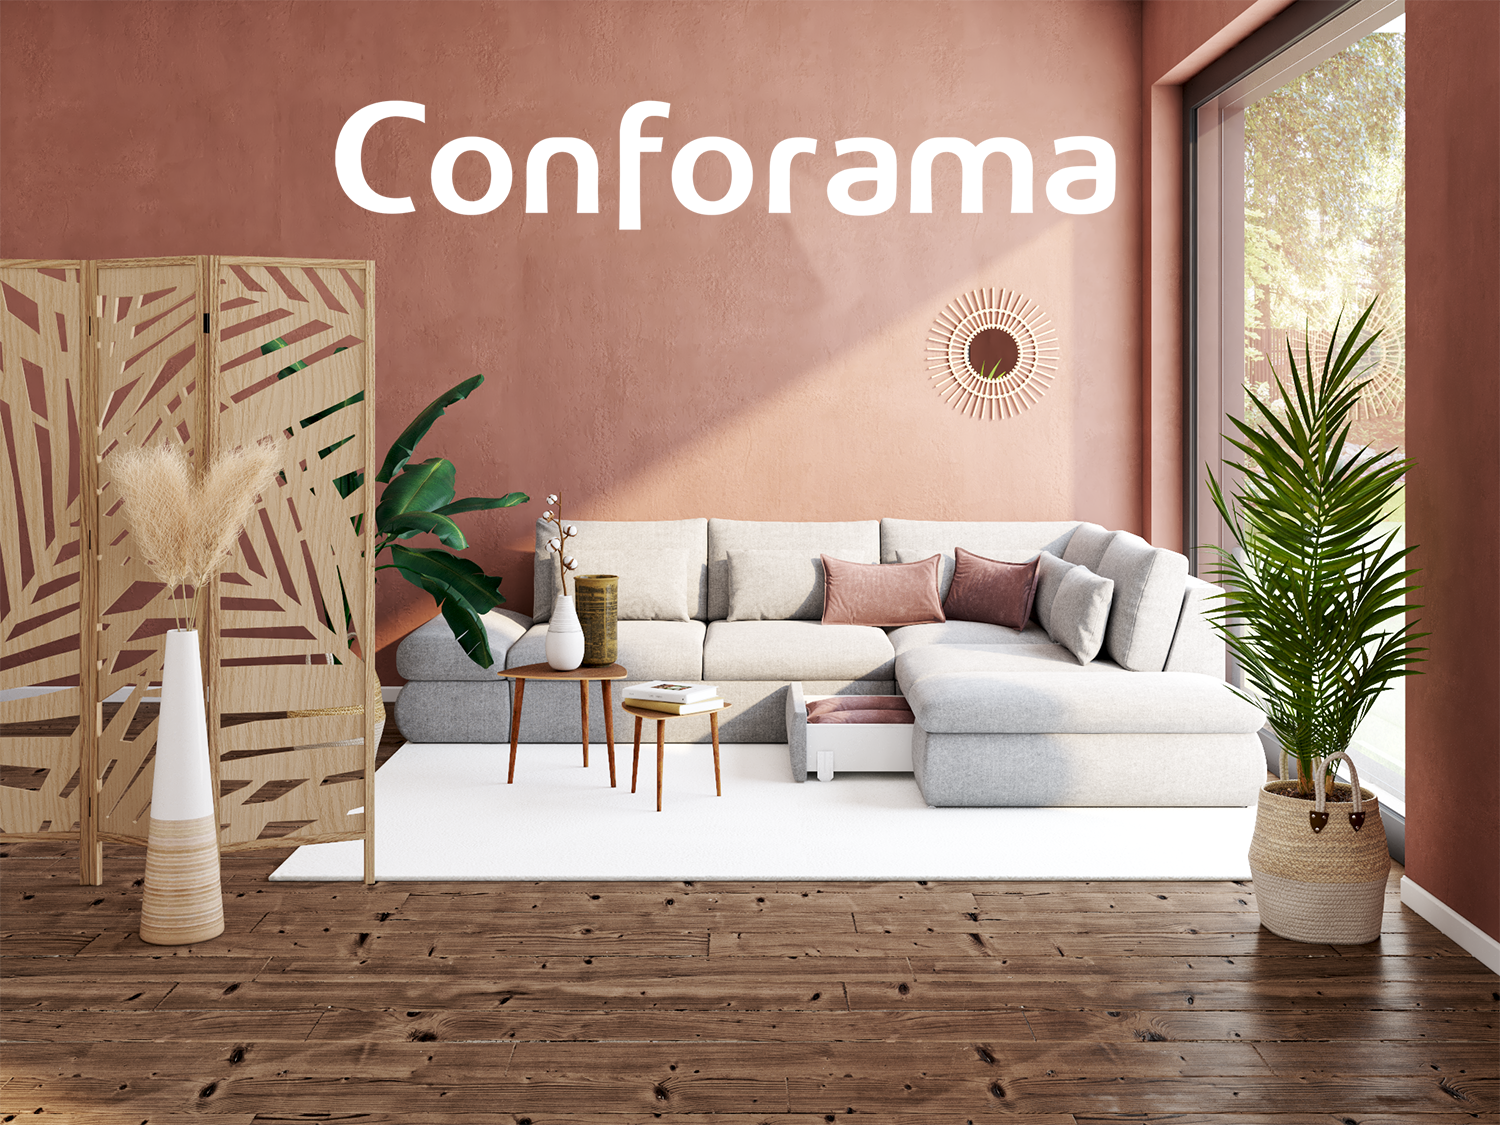 <span class="highlight"> CONFORAMA </span> AI-enabled personalization boosts Conforama CRM campaign revenues